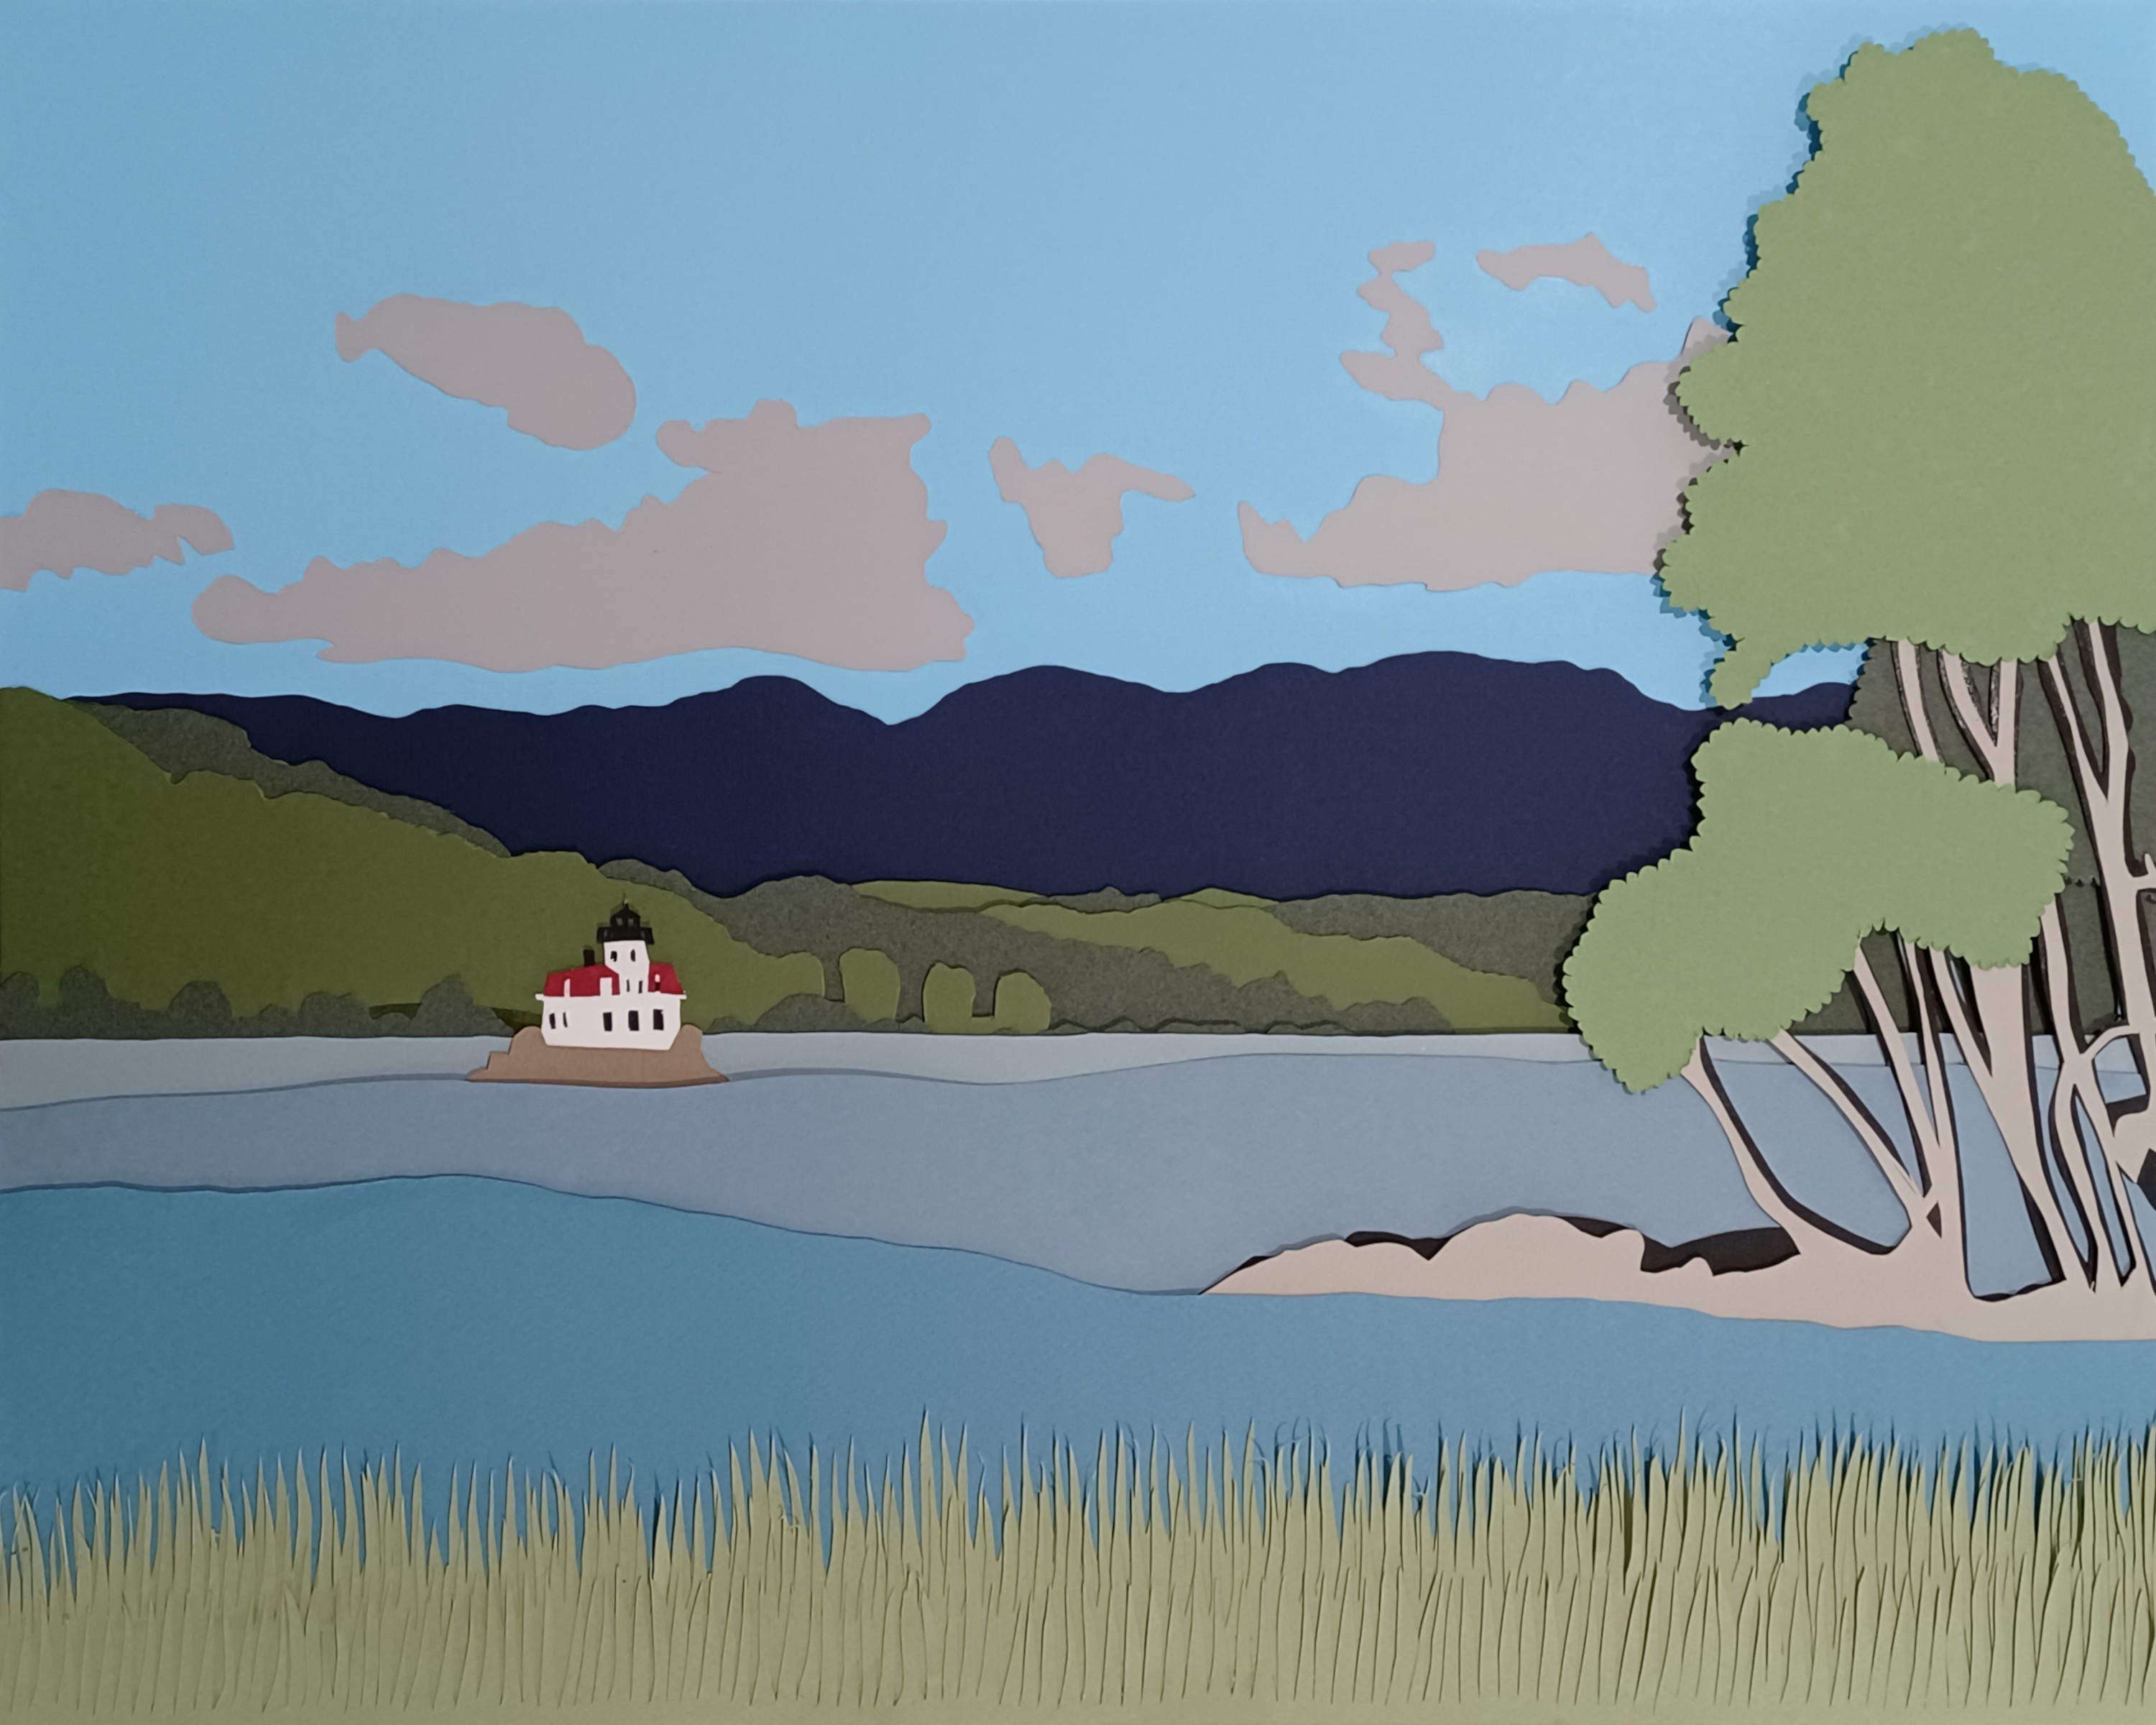 A lighthouse is perched on a stone outcropping in the
                  middle of a wide river. Tall, wavy grass-like weeds
                  span the foreground, with trees growing on a low rocky
                  peninsula behind them. The Catskill Mountains loom in
                  the distance with lush foothills before them.